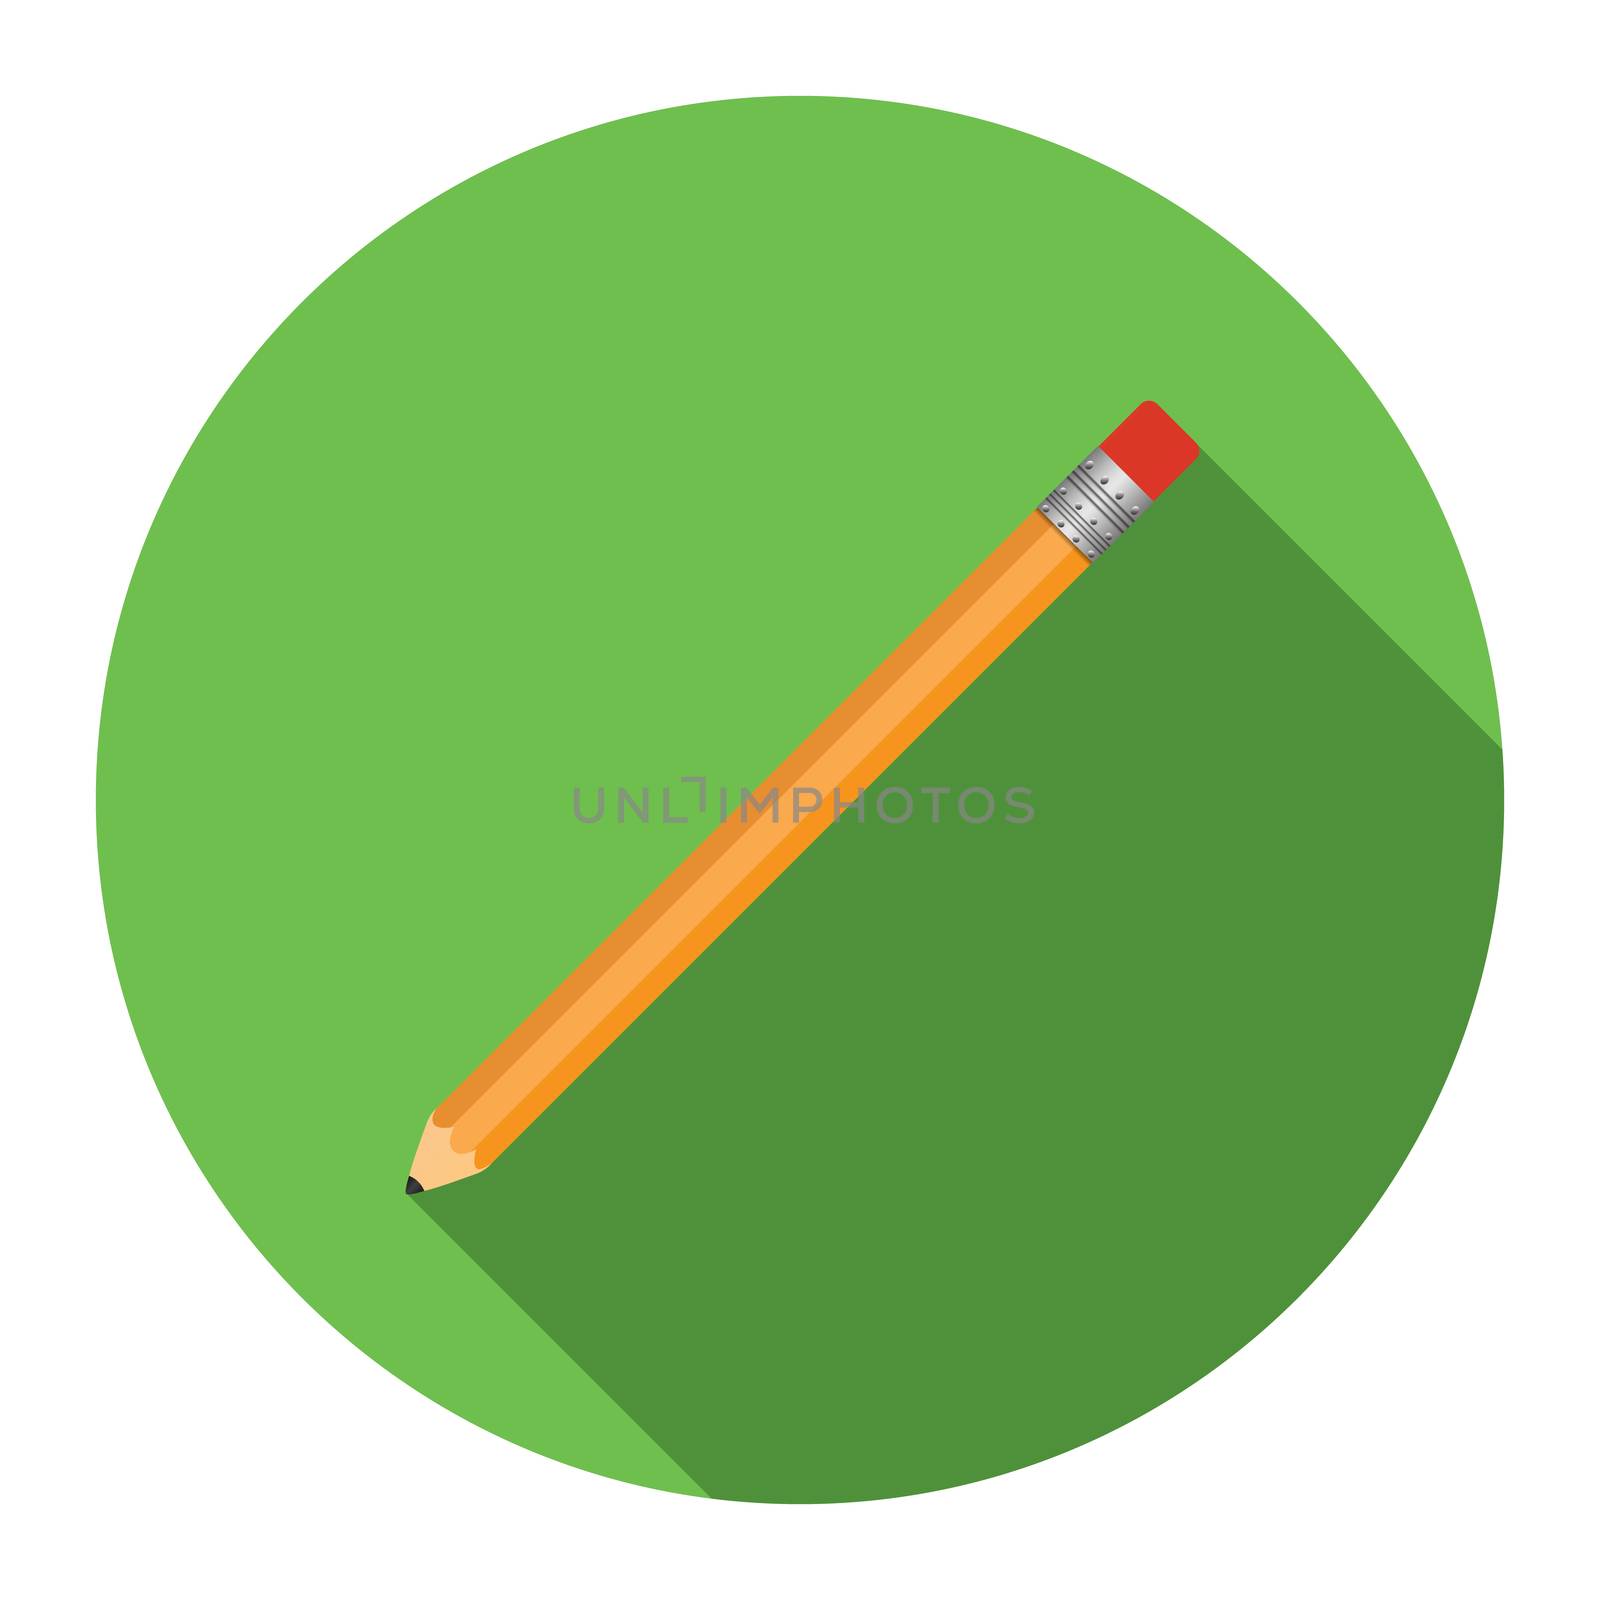 Flat design modern vector illustration of pensil icon with long shadow, isolated.